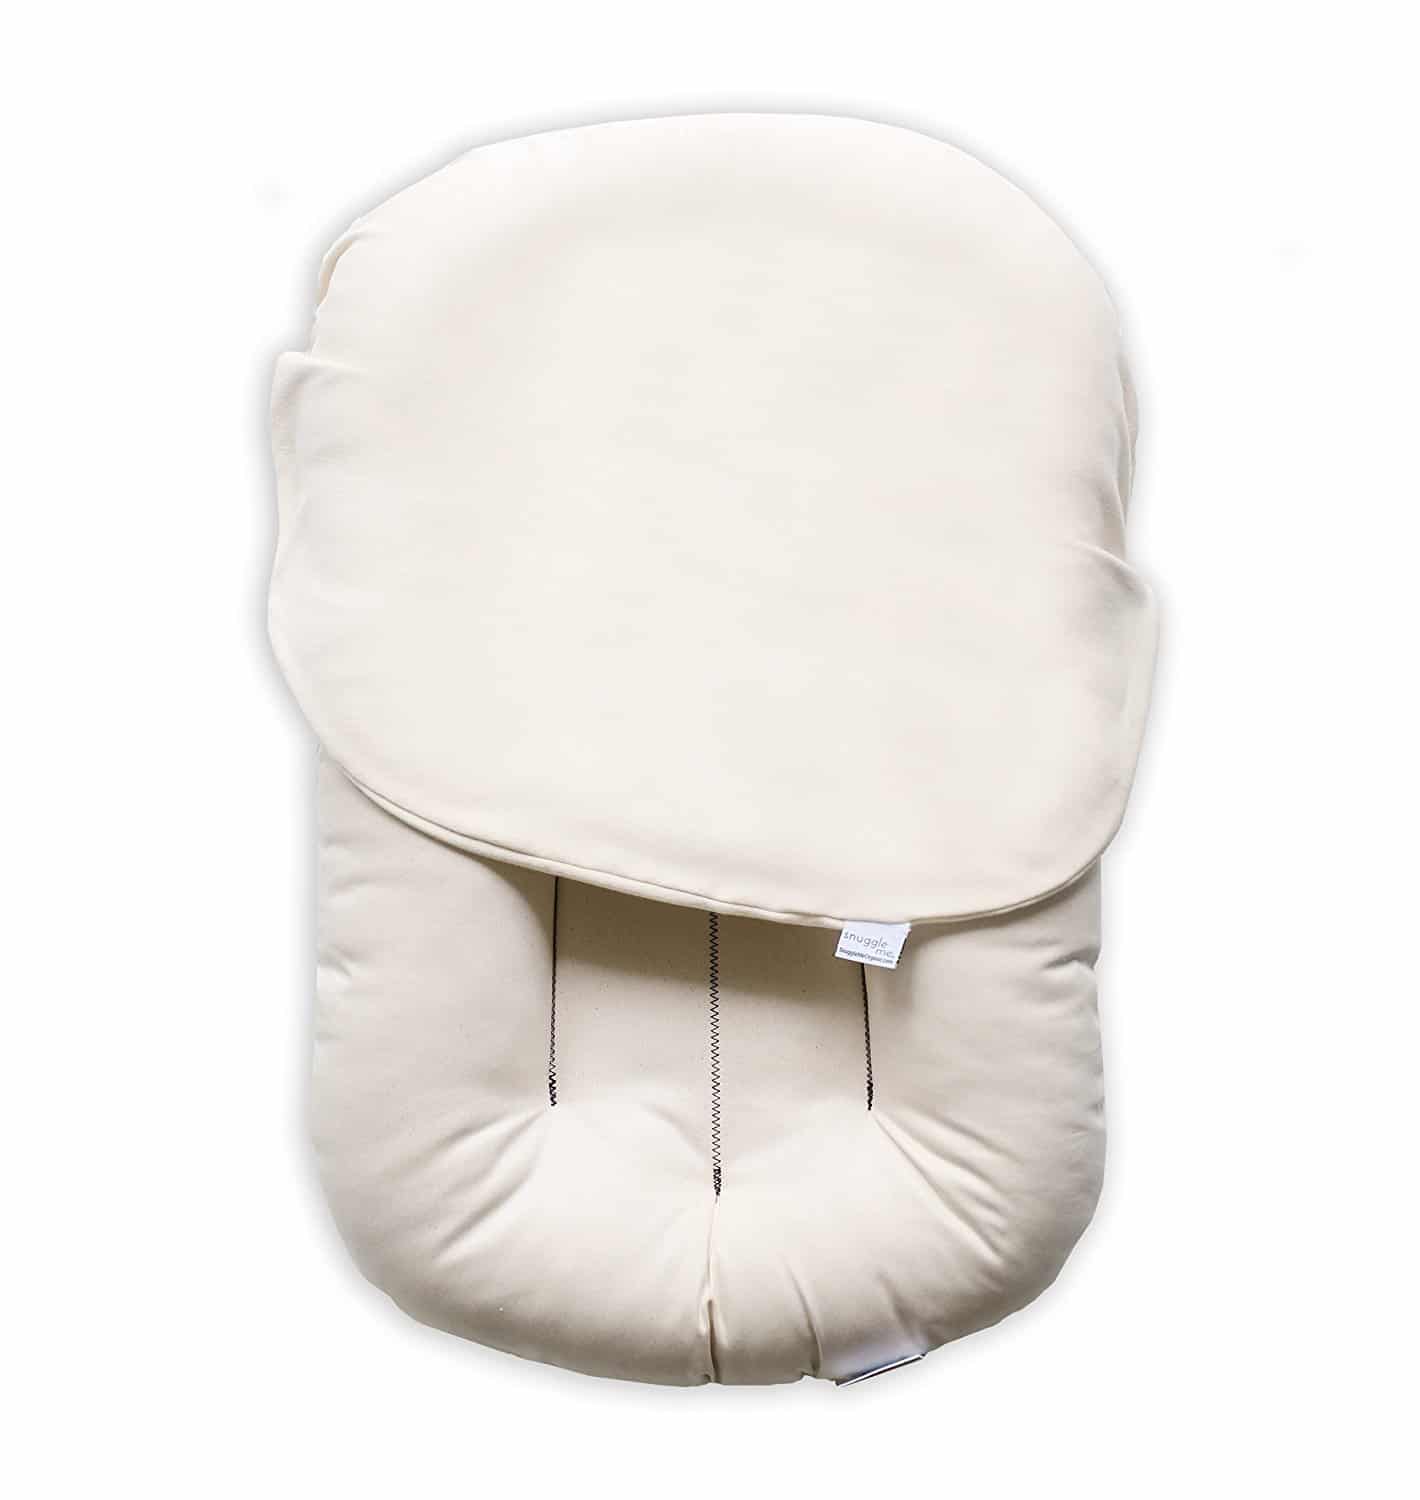 Snuggle Me Organic | Patented Sensory Lounger for Baby | organic cotton, virgin polyester fill